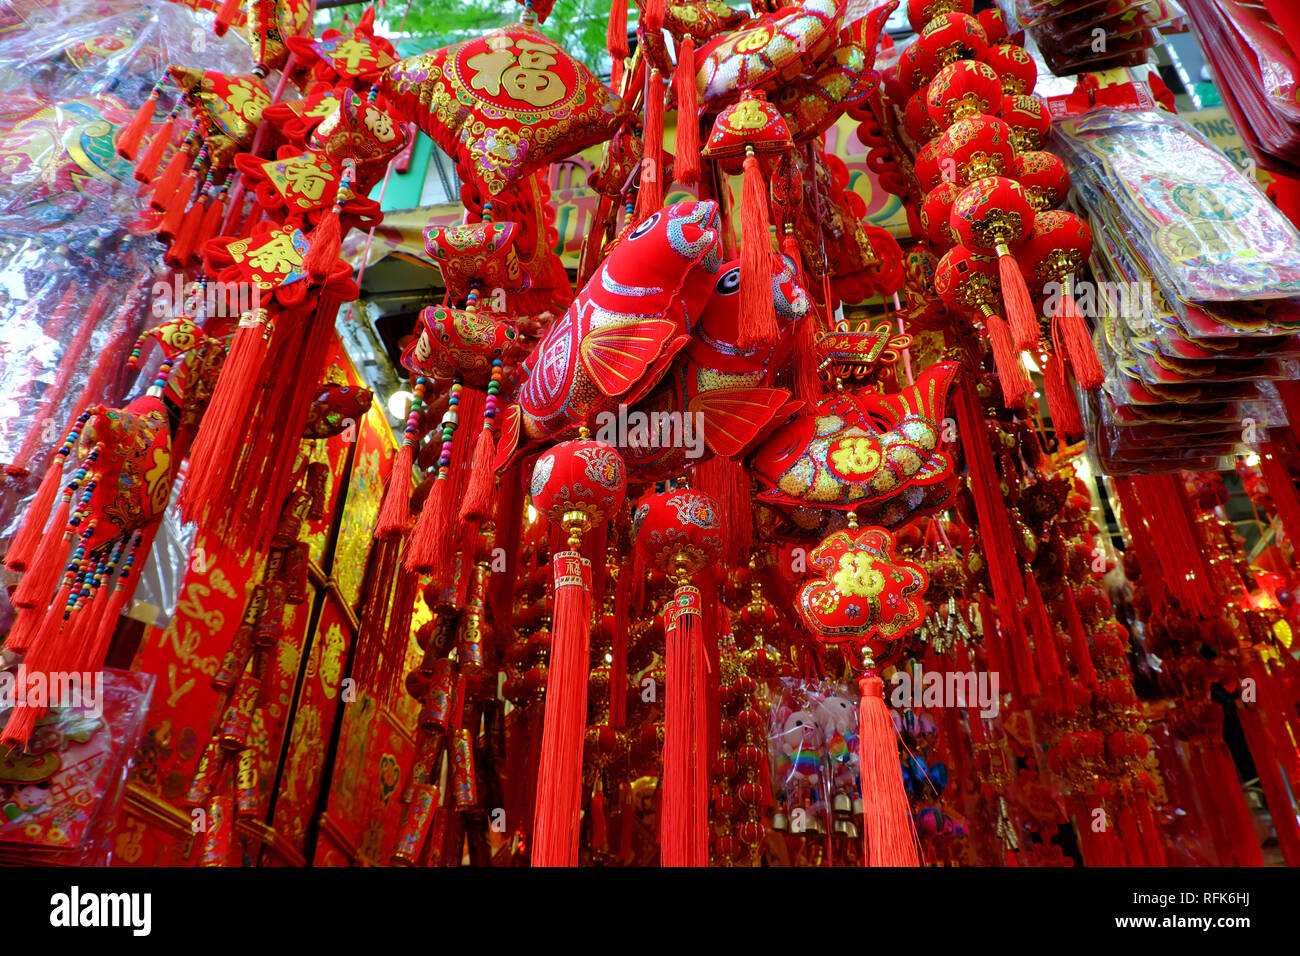 HO CHI MINH CITY, VIET NAM, Close up of vibrant red ornaments for ...